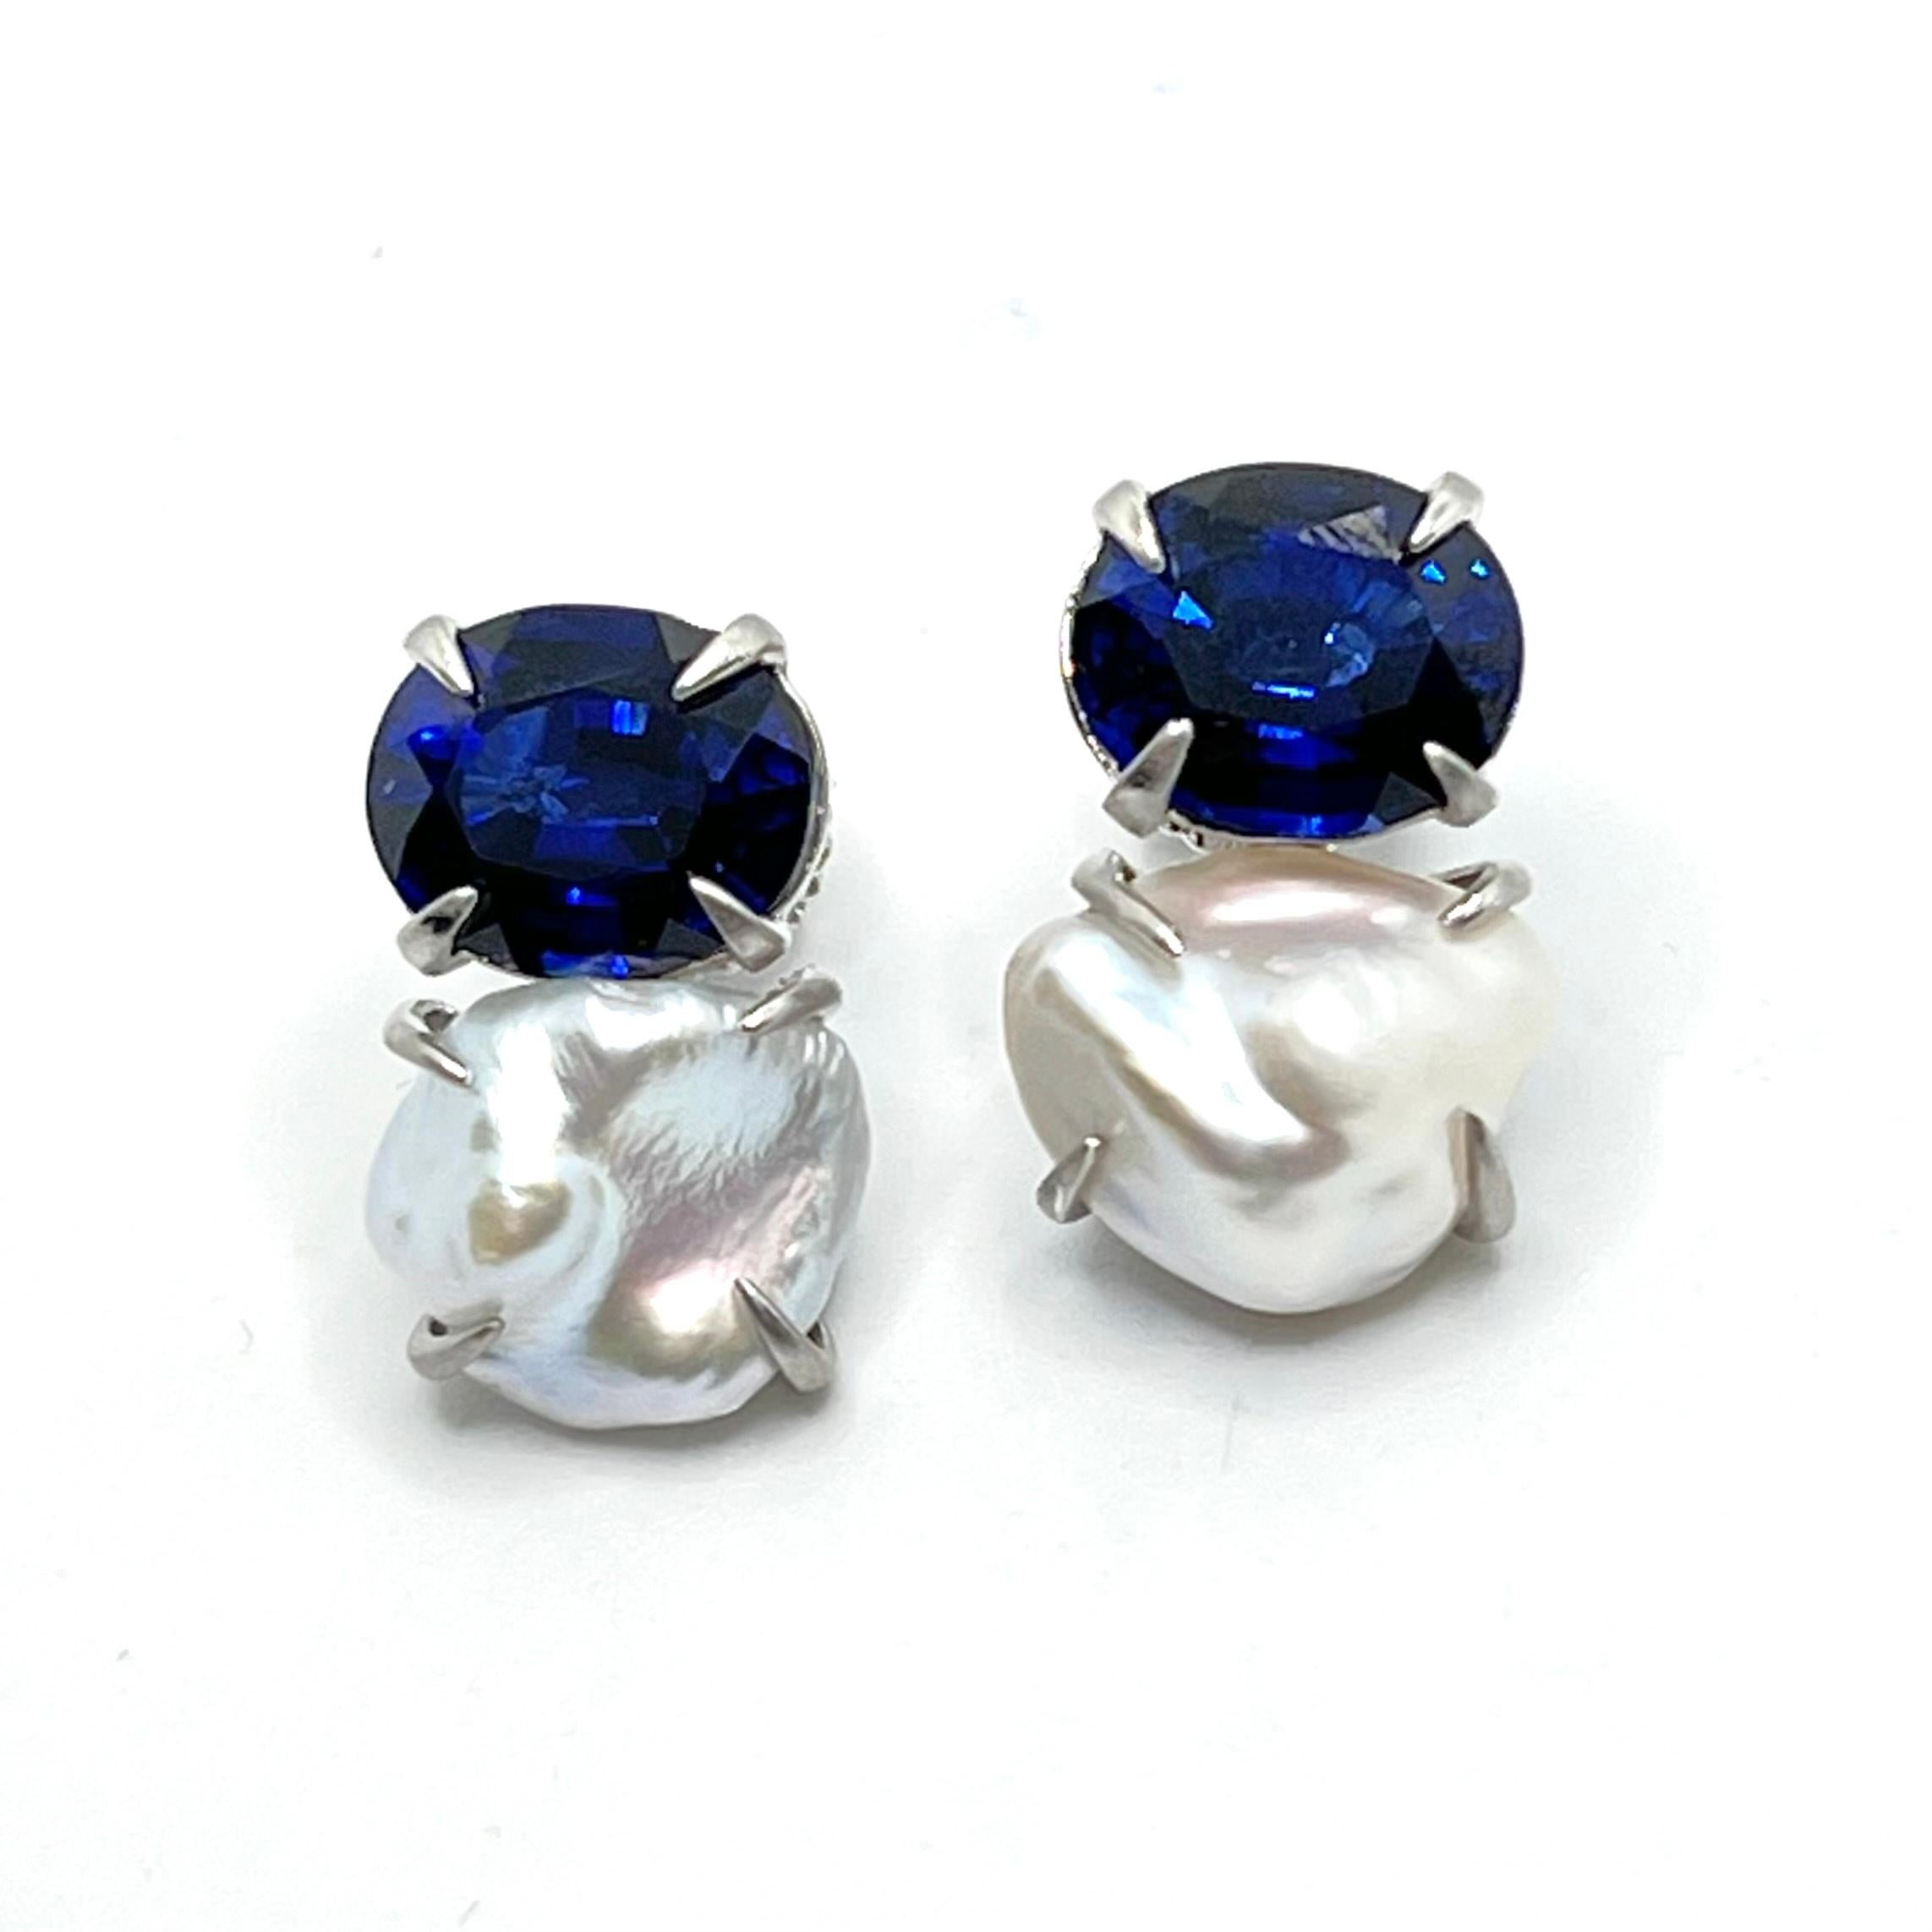 Bijoux Num Oval Blue Sapphire and Keishi Pearl Earrings. 

The stunning pair of earrings feature beautiful lab-created blue sapphire and lustrous cultured Japanese Keishi pearl, handset in platinum rhodium plated sterling silver and brush satin